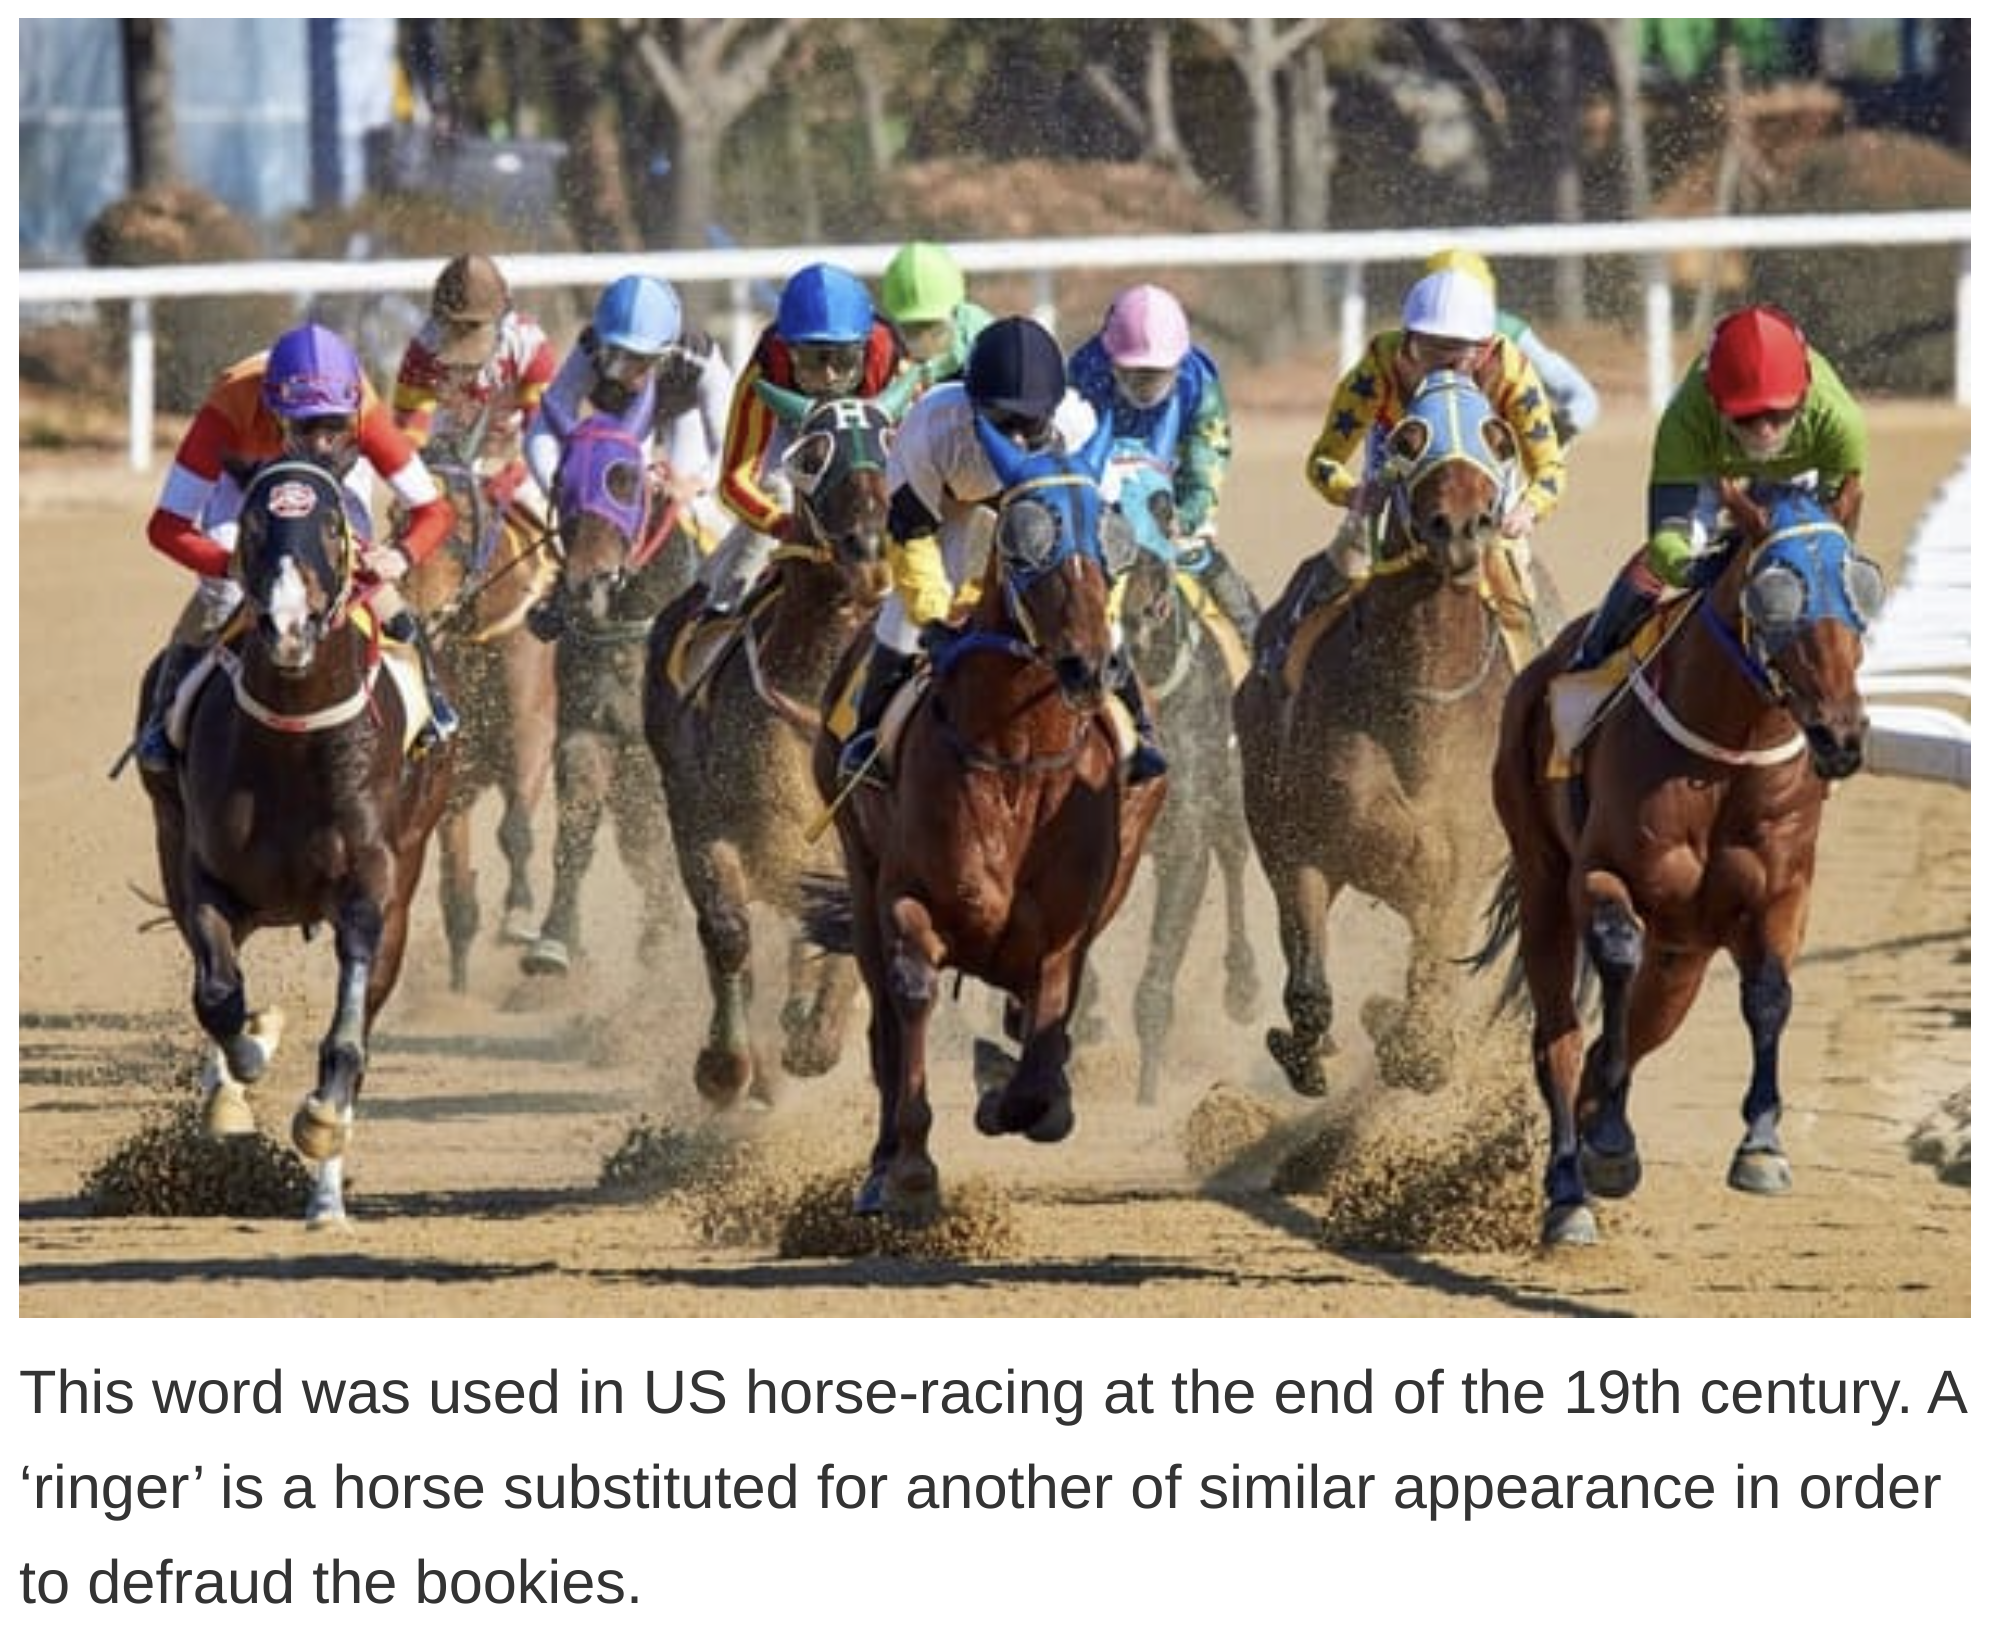 etymology english language - This word was used in Us horse racing at the end of the 19th century. A ringer' is a horse substituted for another of similar appearance in order to defraud the bookies.